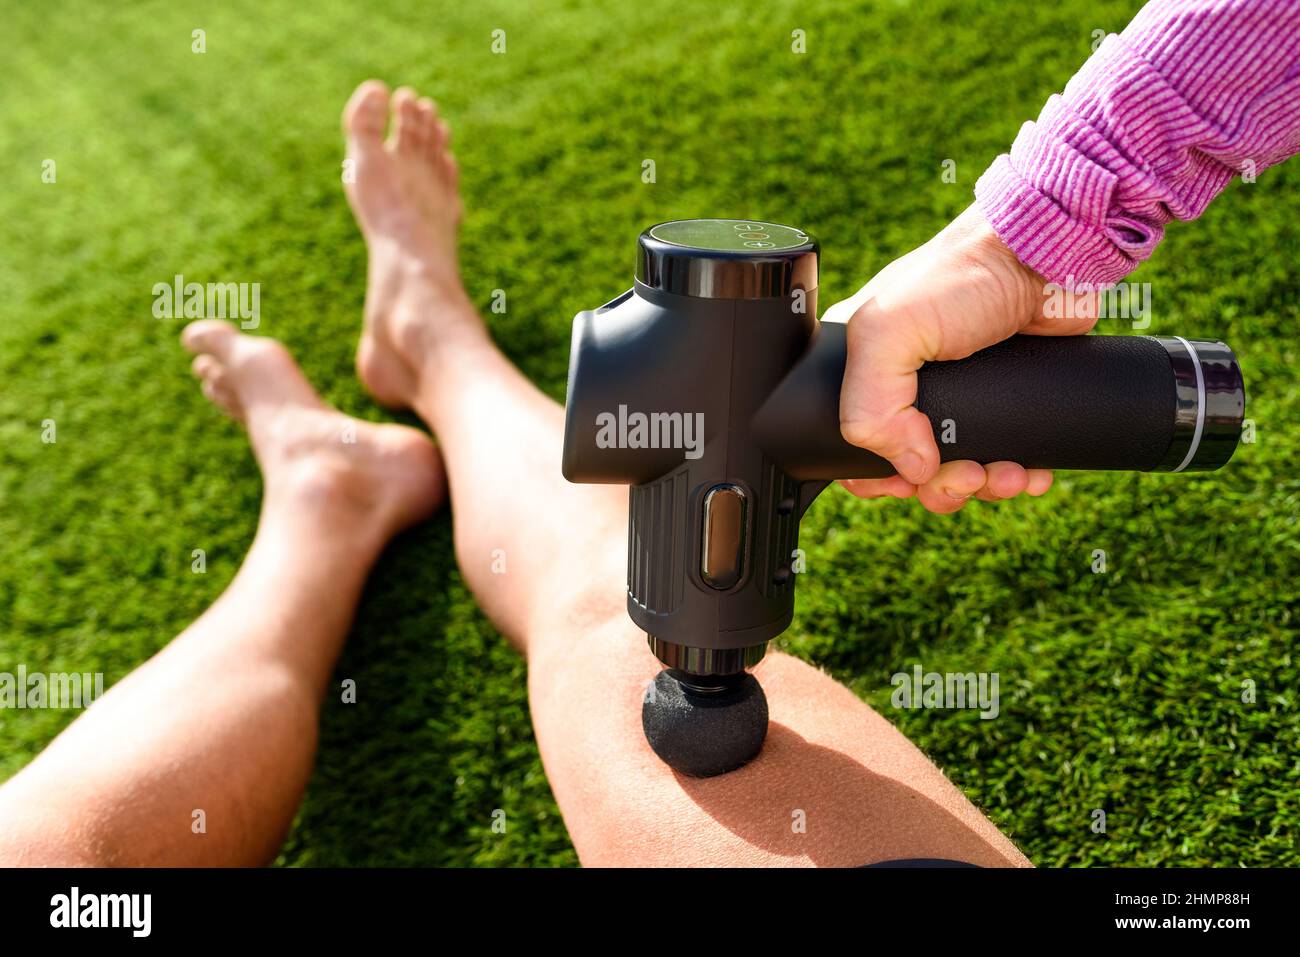 Athlete receives a massage with a percussion gun to relieve pain from muscle soreness in his legs. Stock Photo